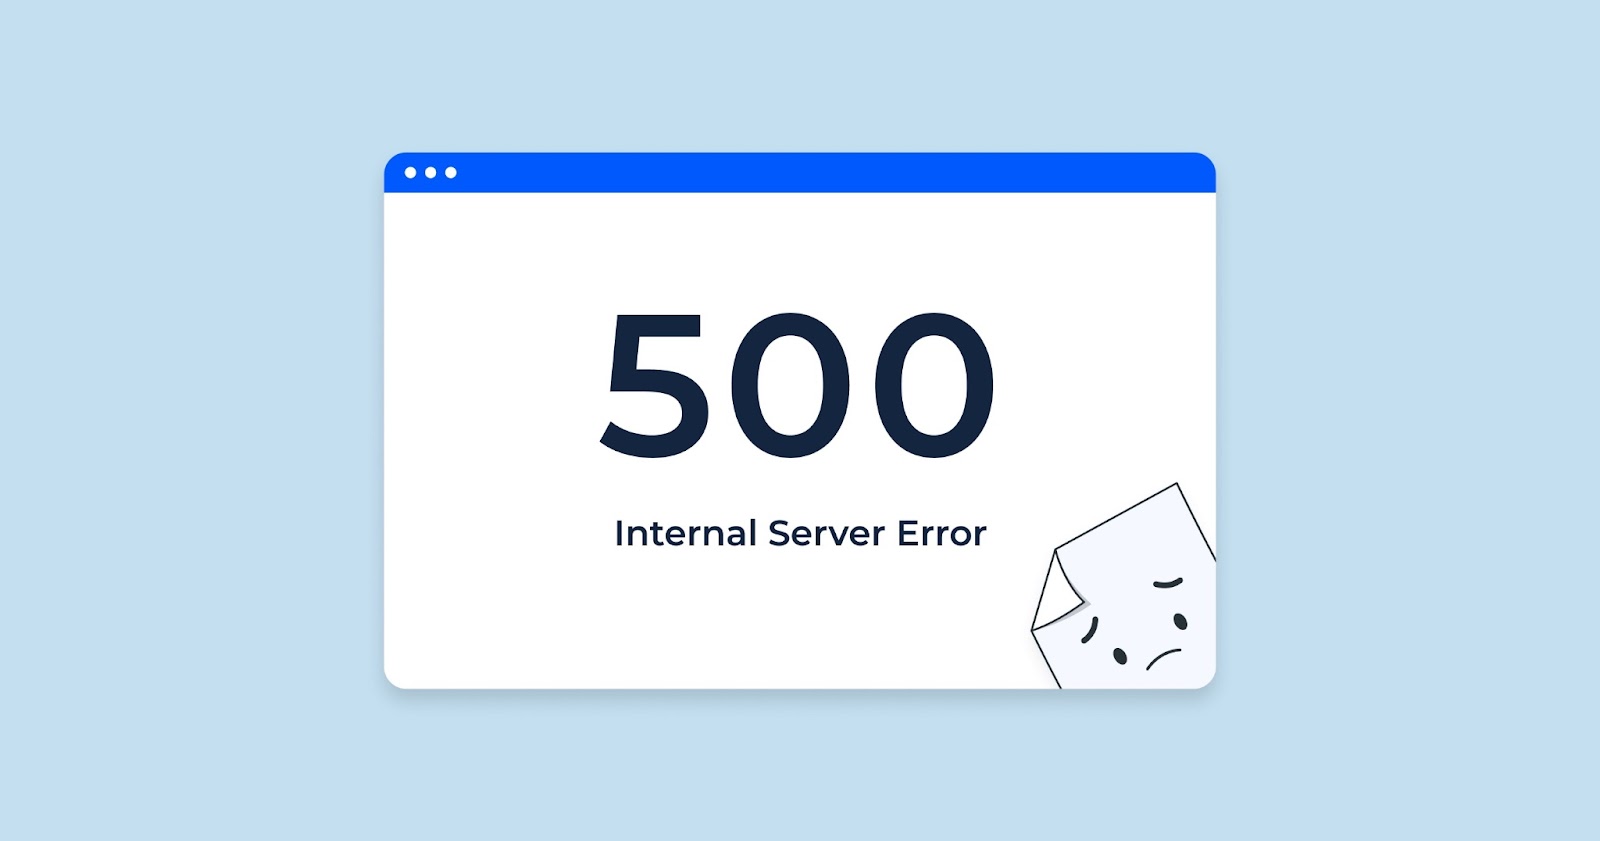 Error 500 on a website page